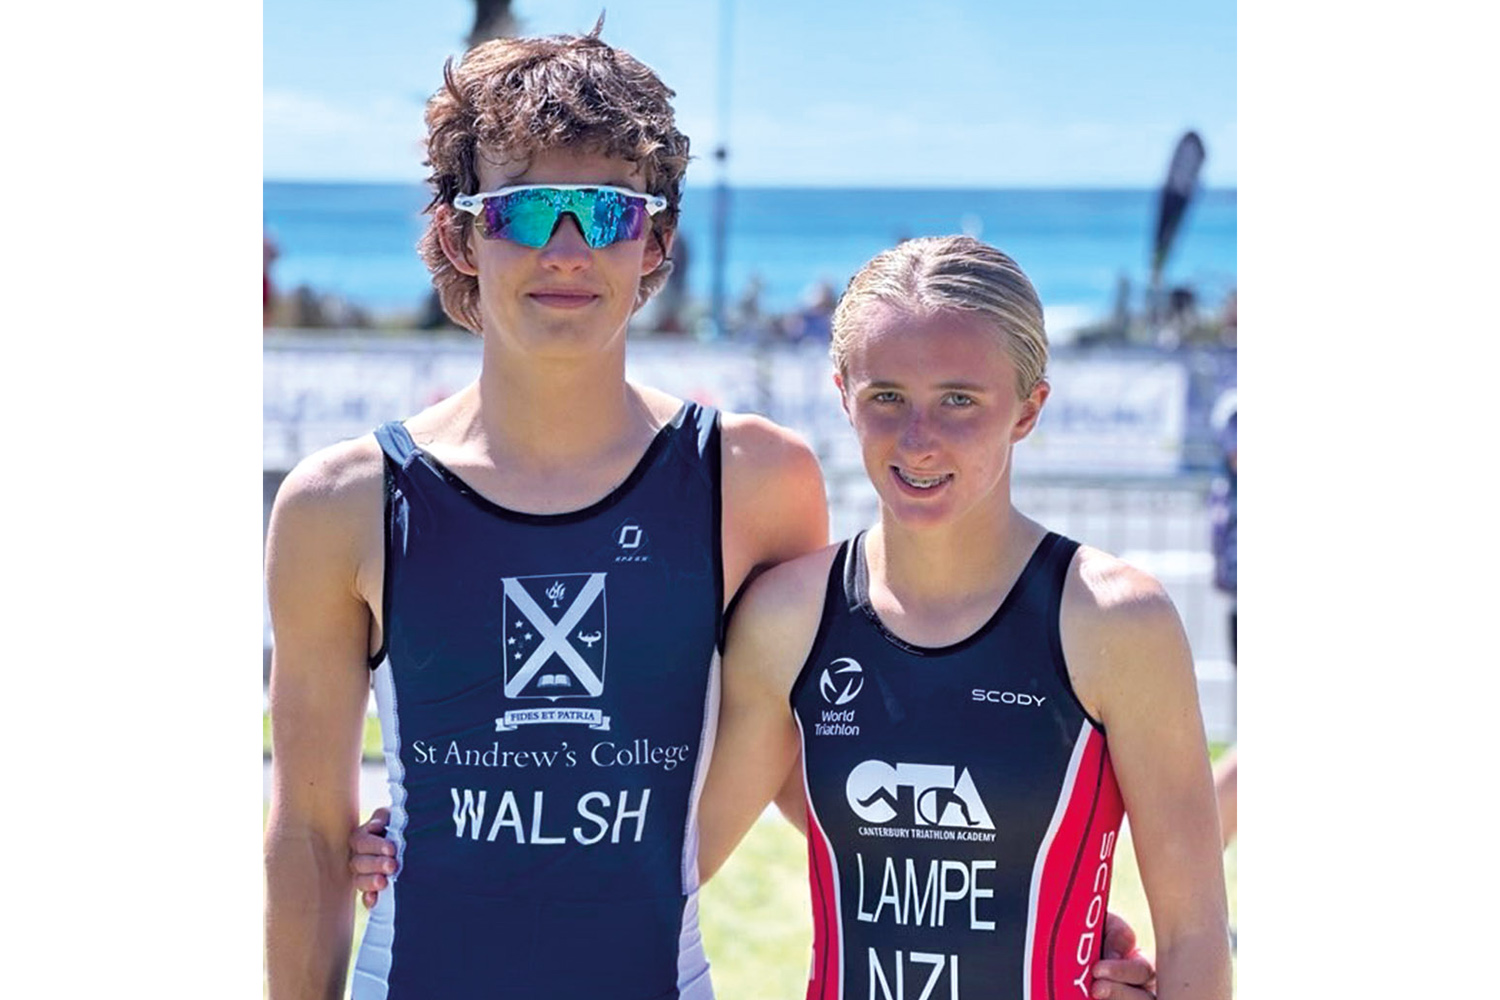 St Andrew's College students Cohnor Walsh and Sophie Lampe at the New Zealand Secondary Schools' Triathlon Championships.